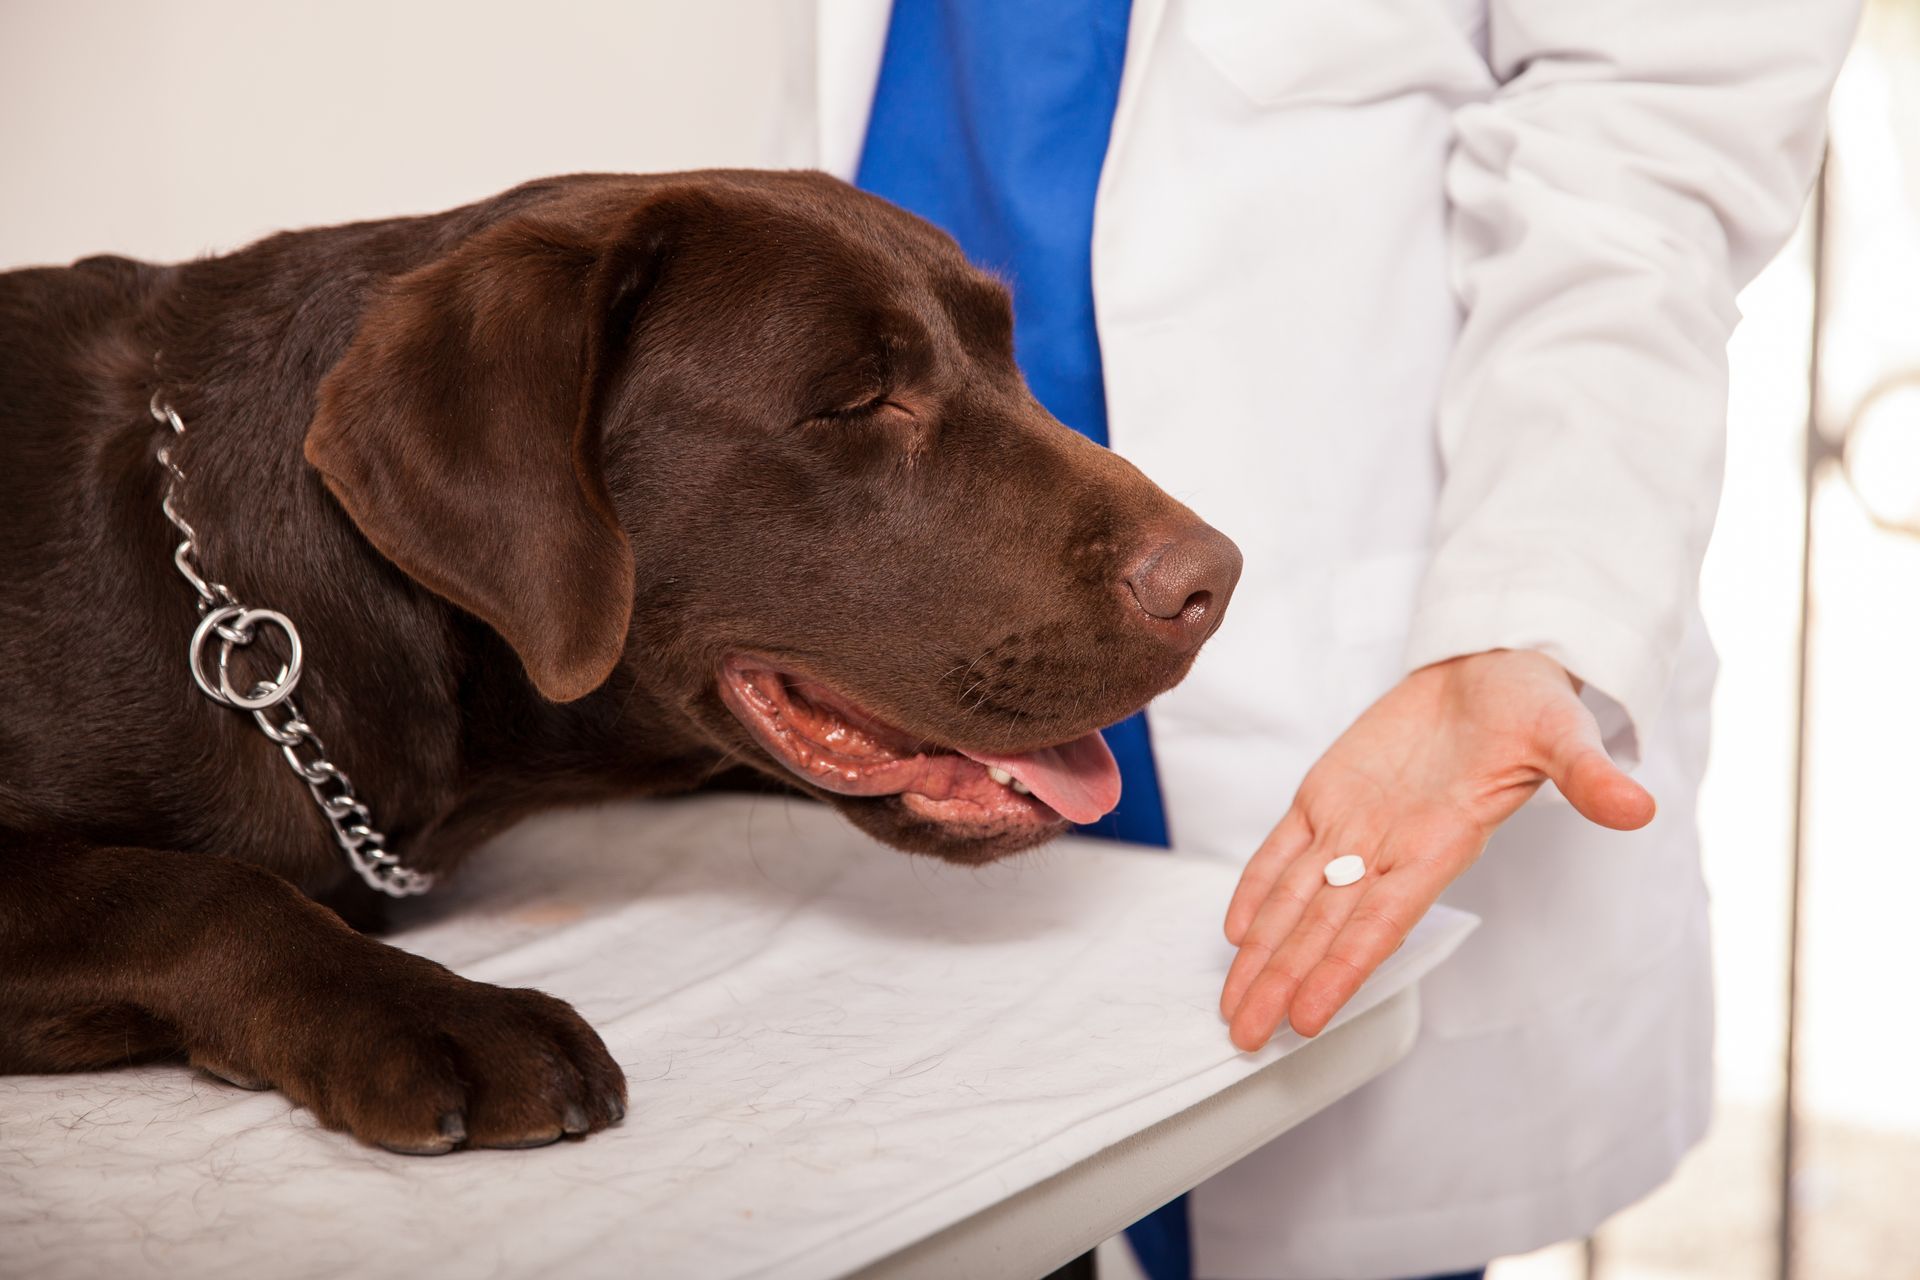 giving medicine to a dog